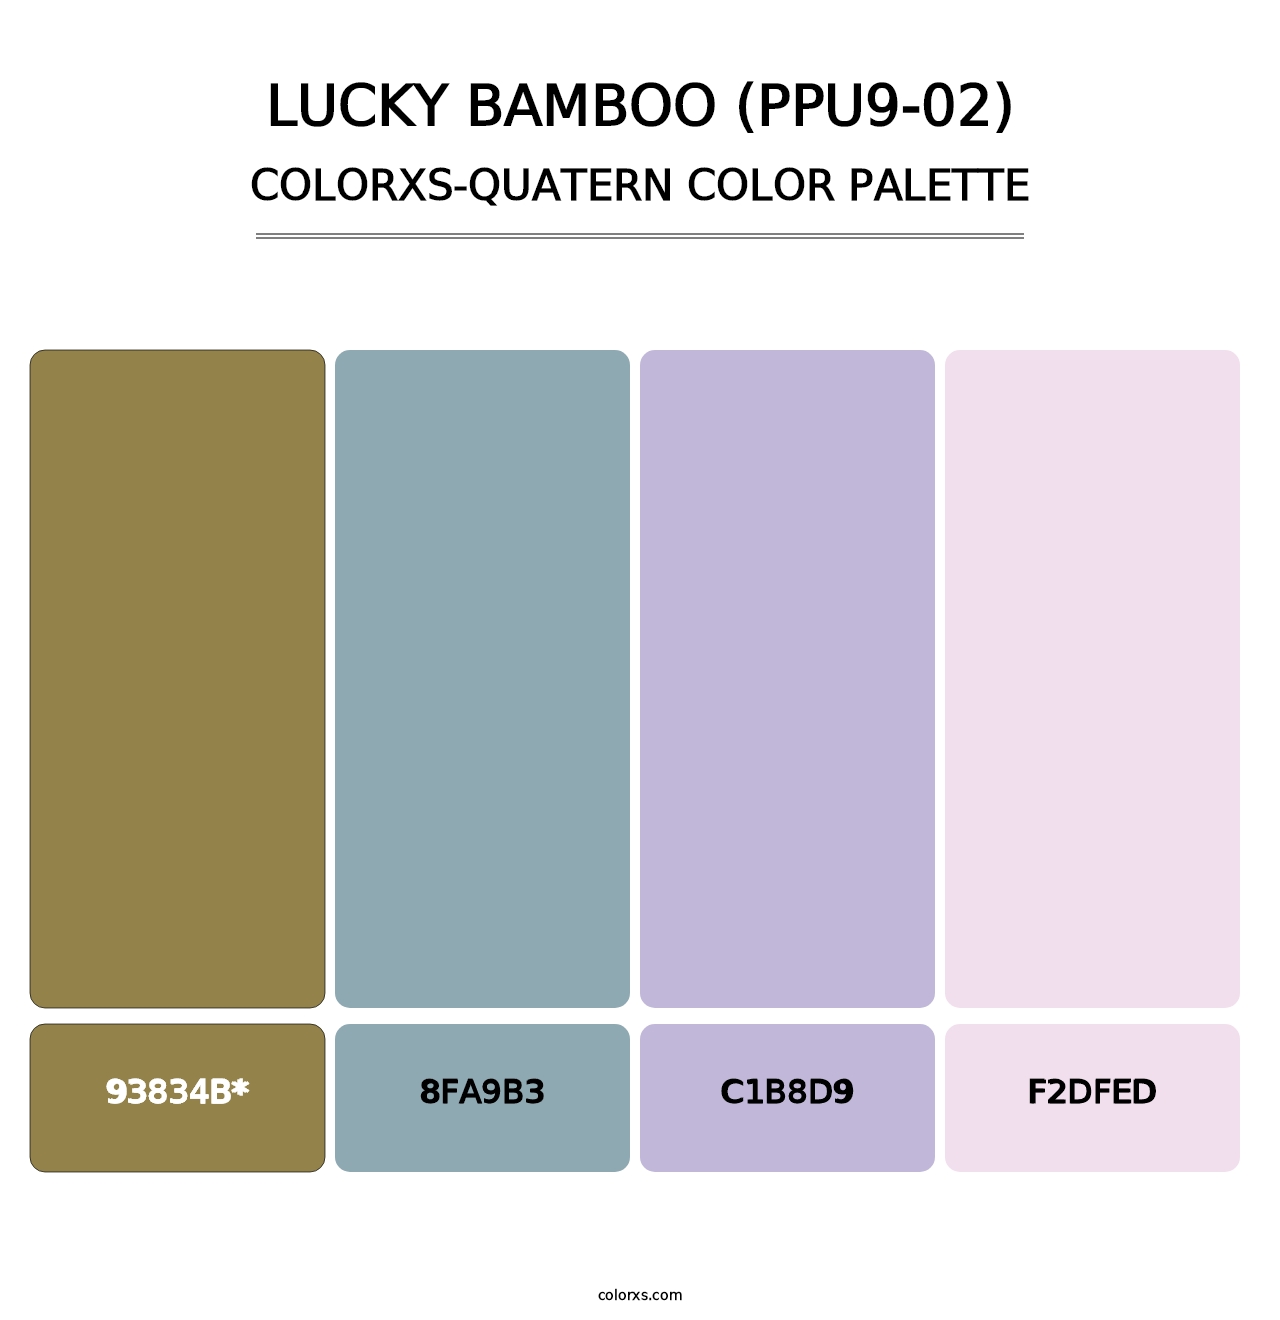 Lucky Bamboo (PPU9-02) - Colorxs Quatern Palette